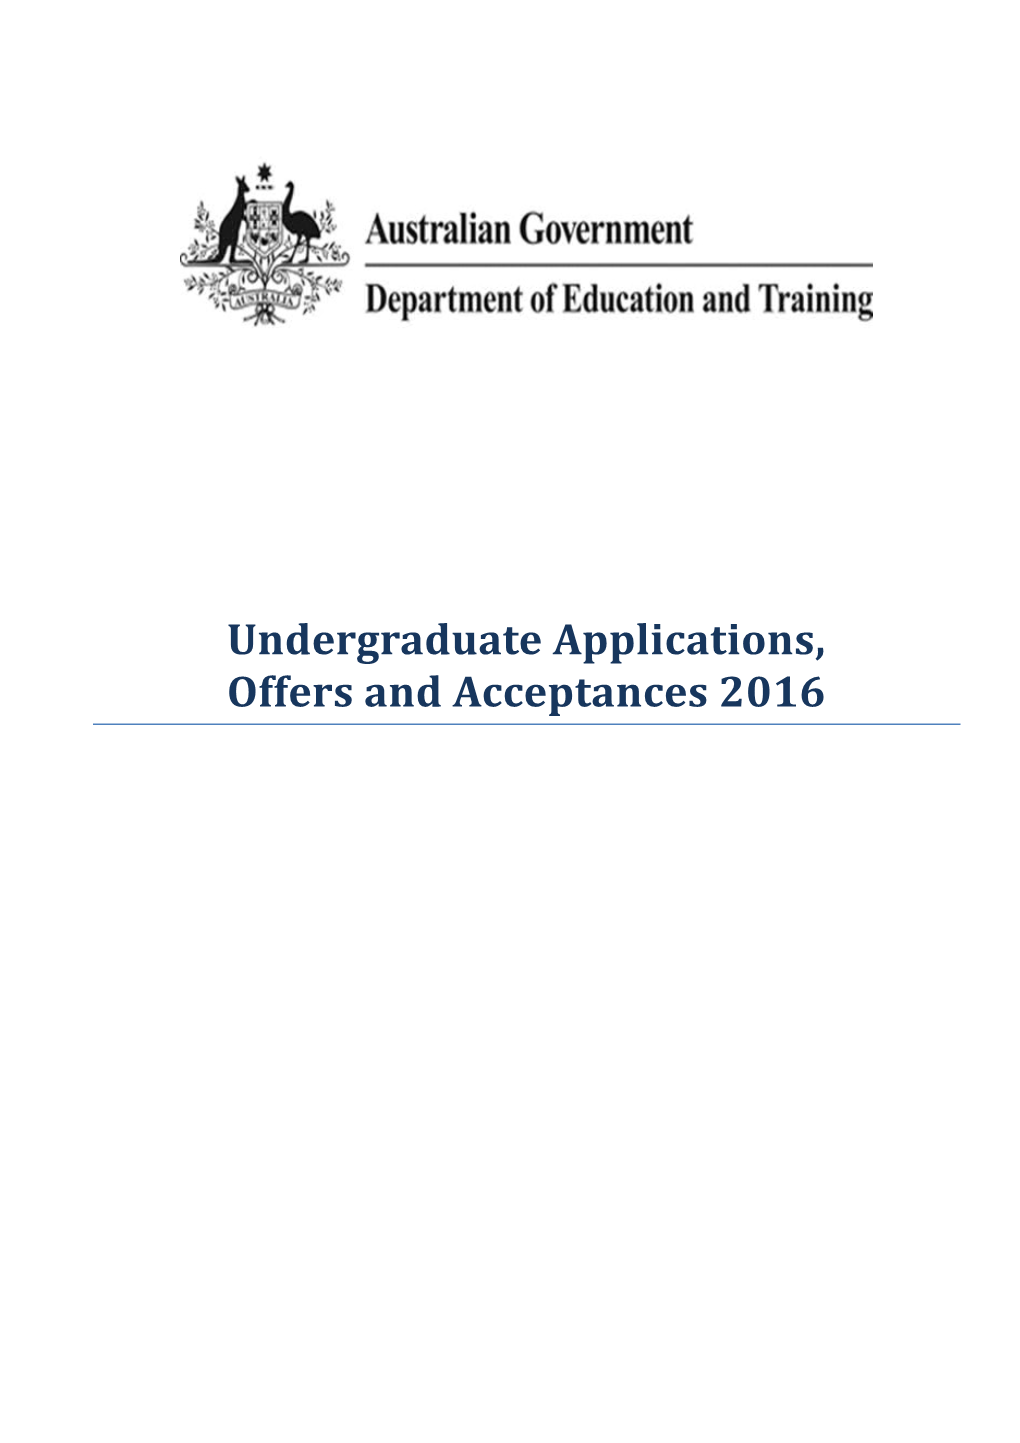 Undergraduate Applications, Offers and Acceptances 2016